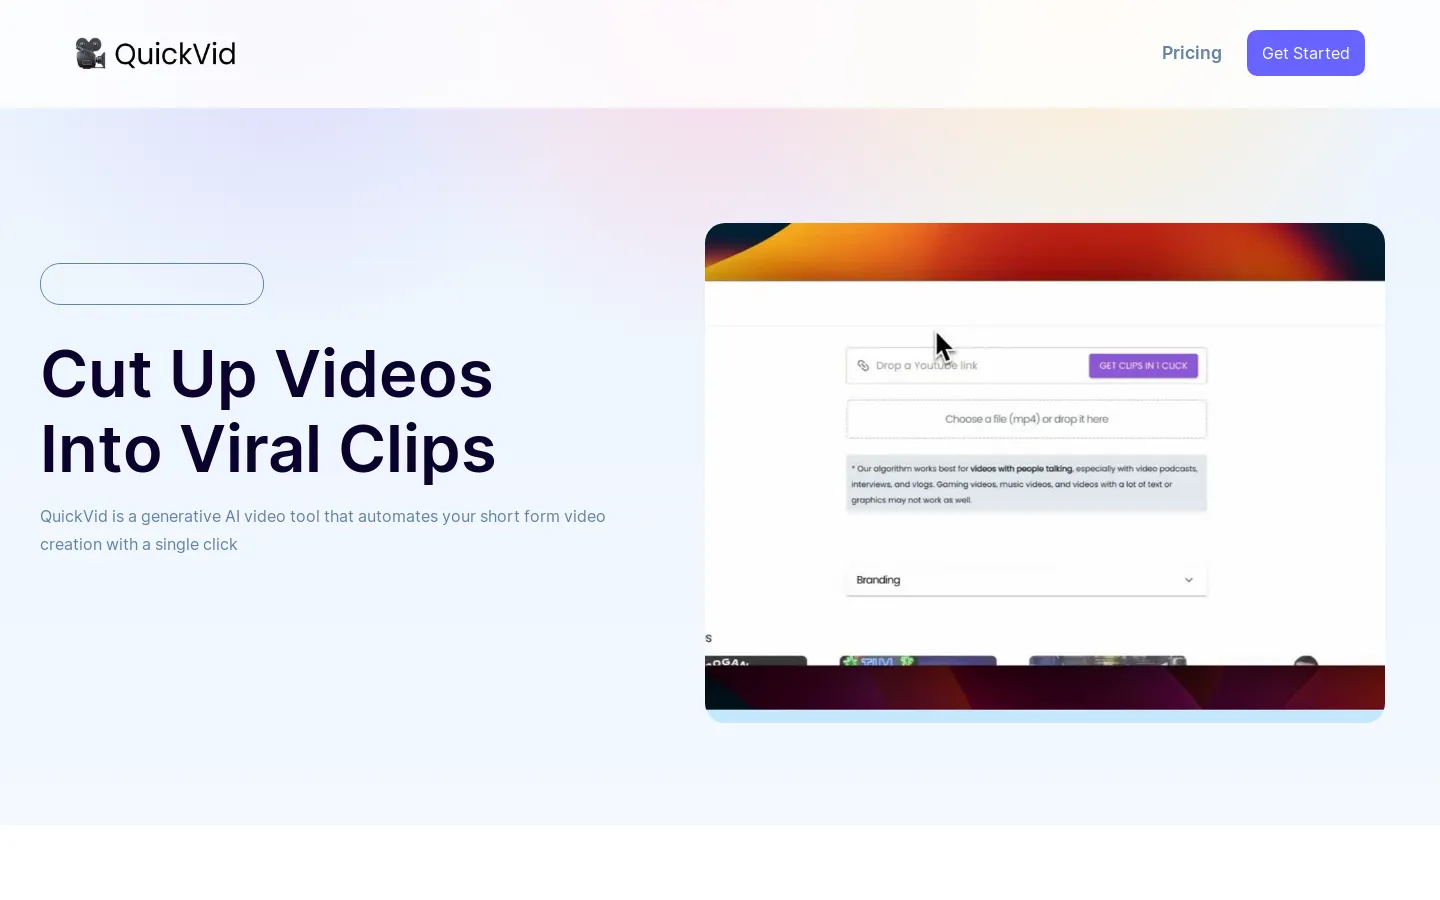 QuickVid - Cut up long videos into dozens of viral clips